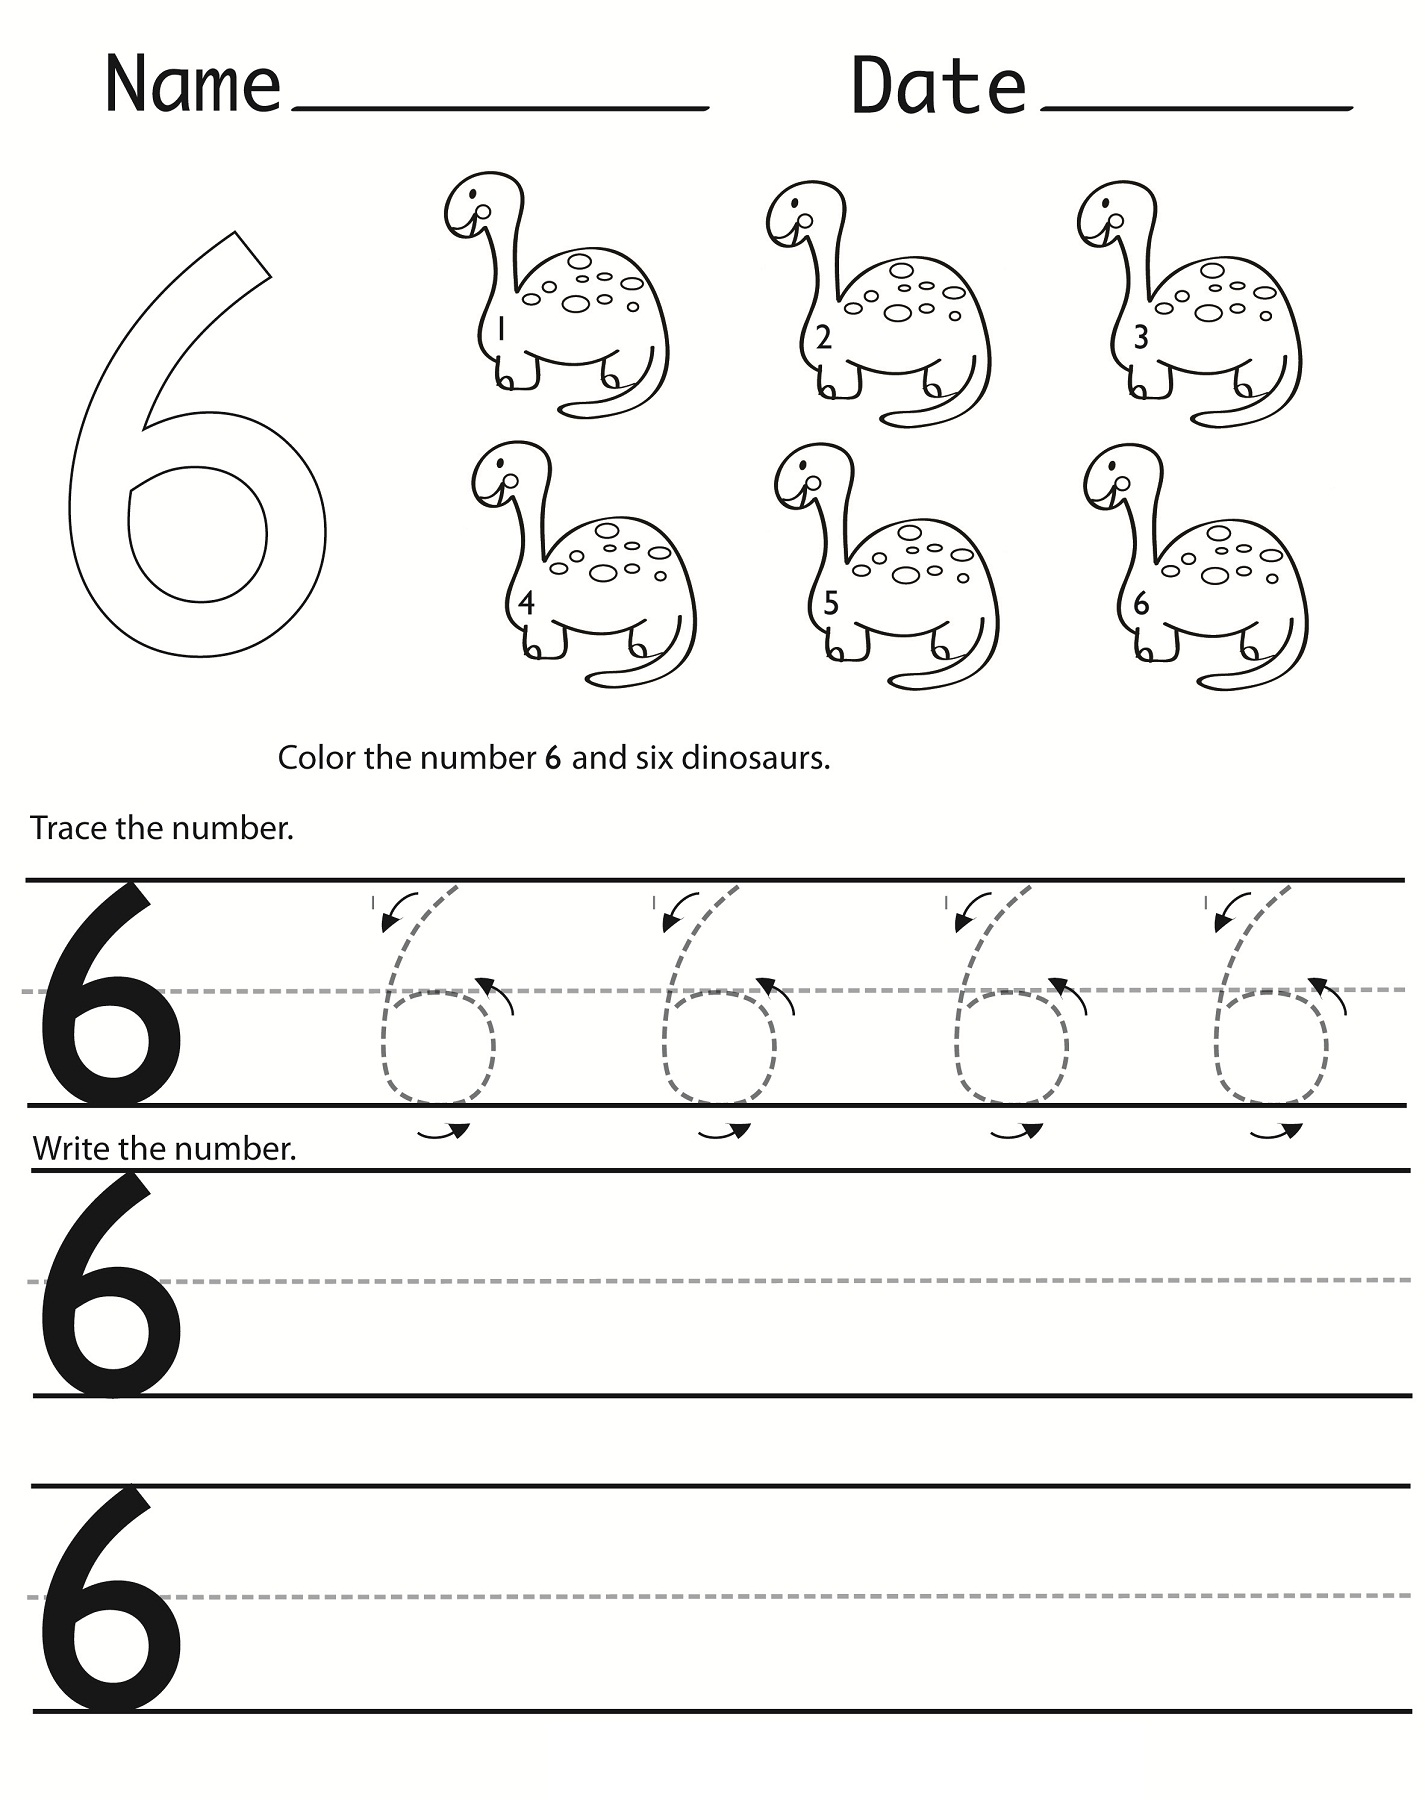 Writing Numbers Worksheets Printable | Activity Shelter